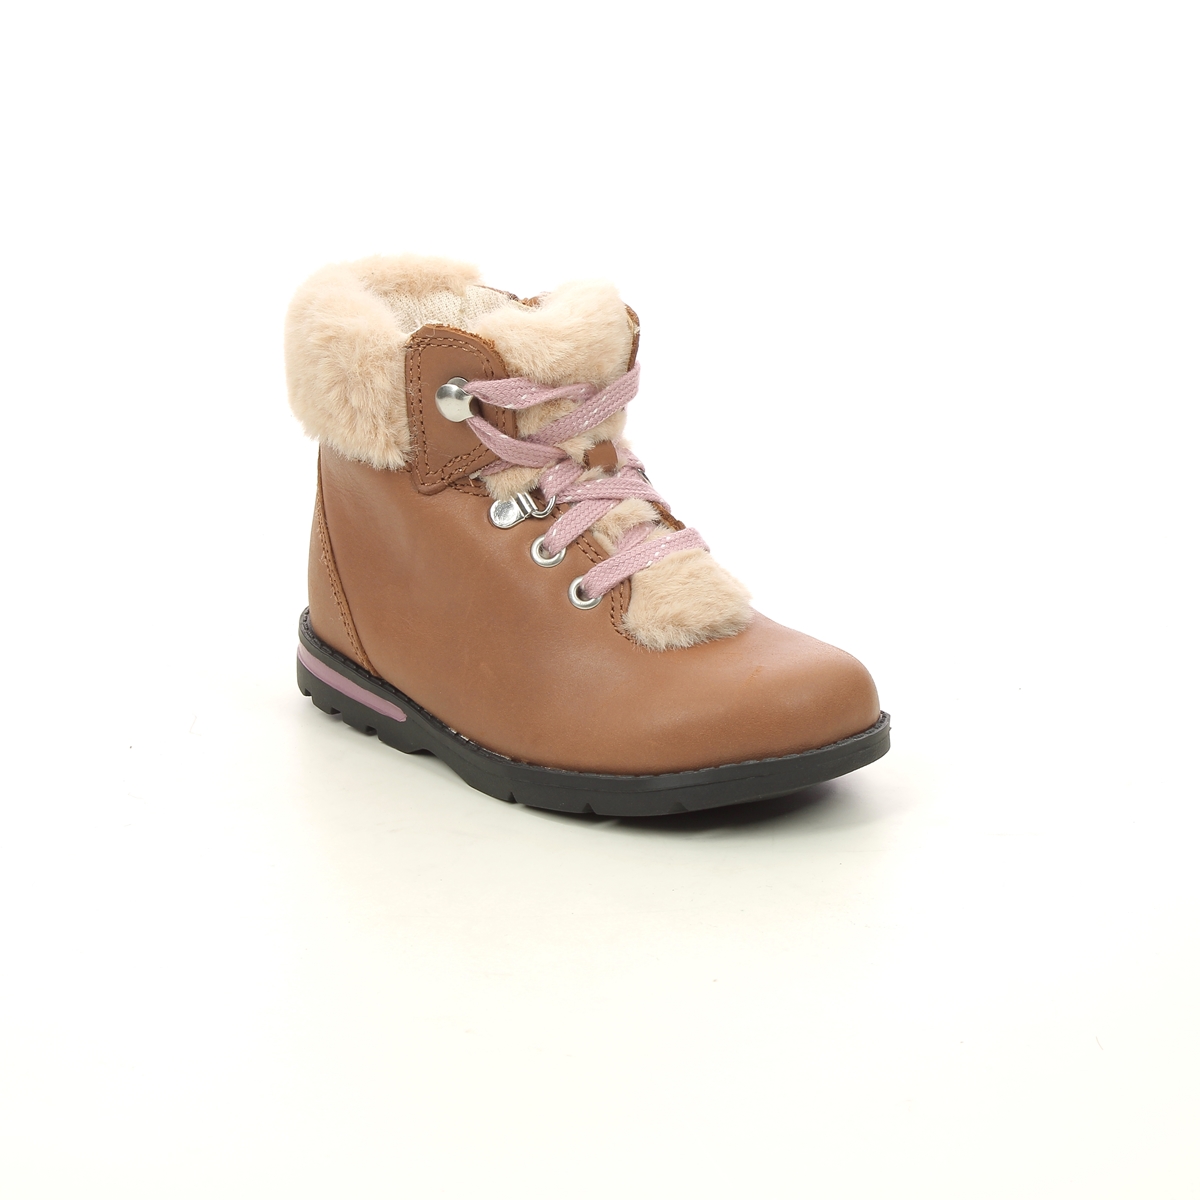 Clarks Dabi Hiker T Tan Leather Kids Toddler Girls Boots 6194-07G in a Plain Leather in Size 5.5